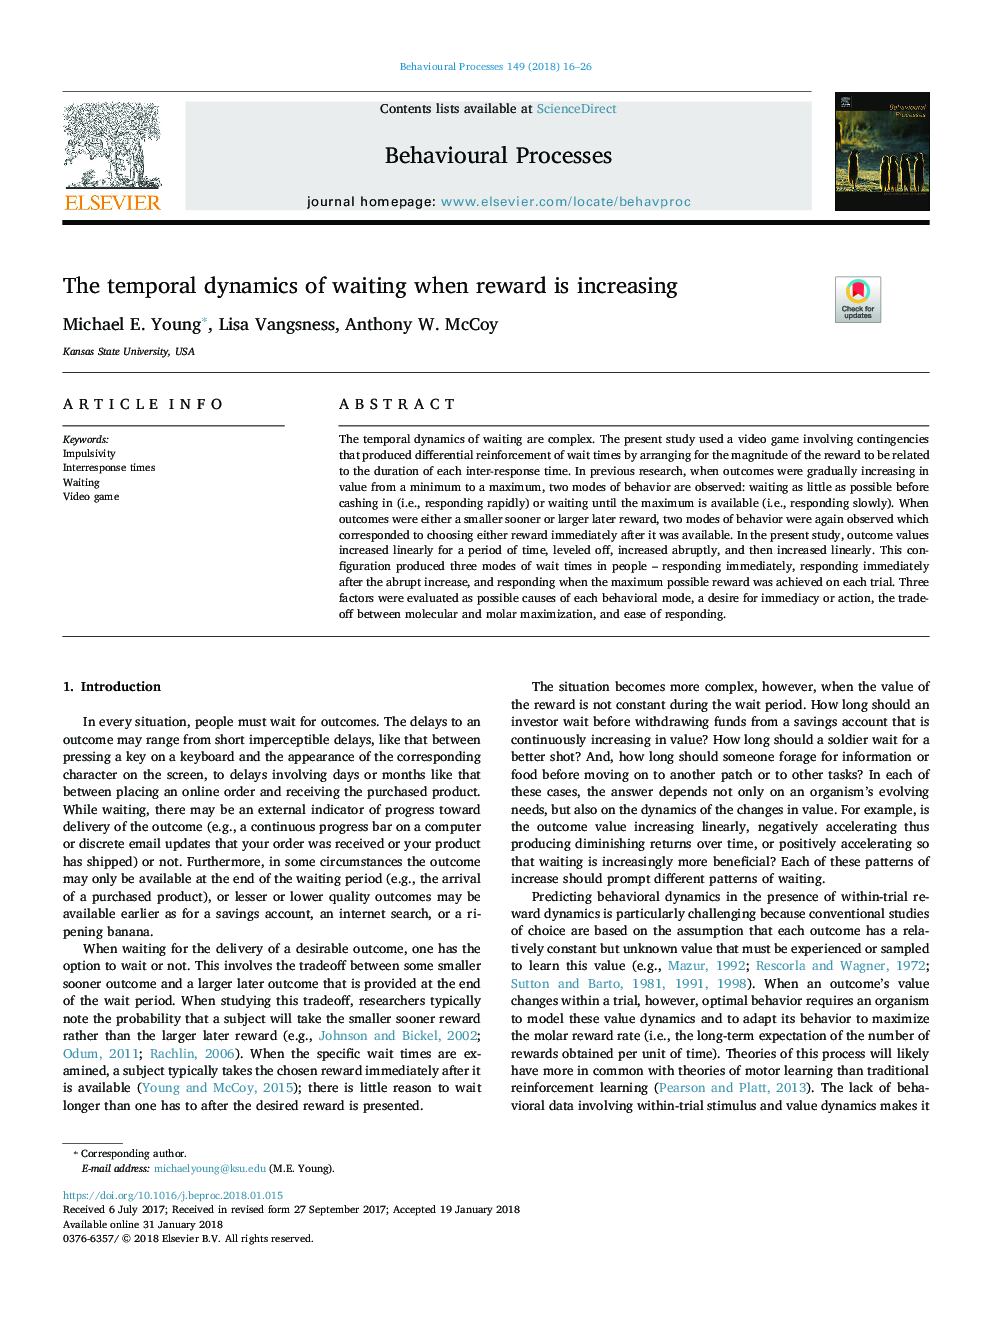 The temporal dynamics of waiting when reward is increasing